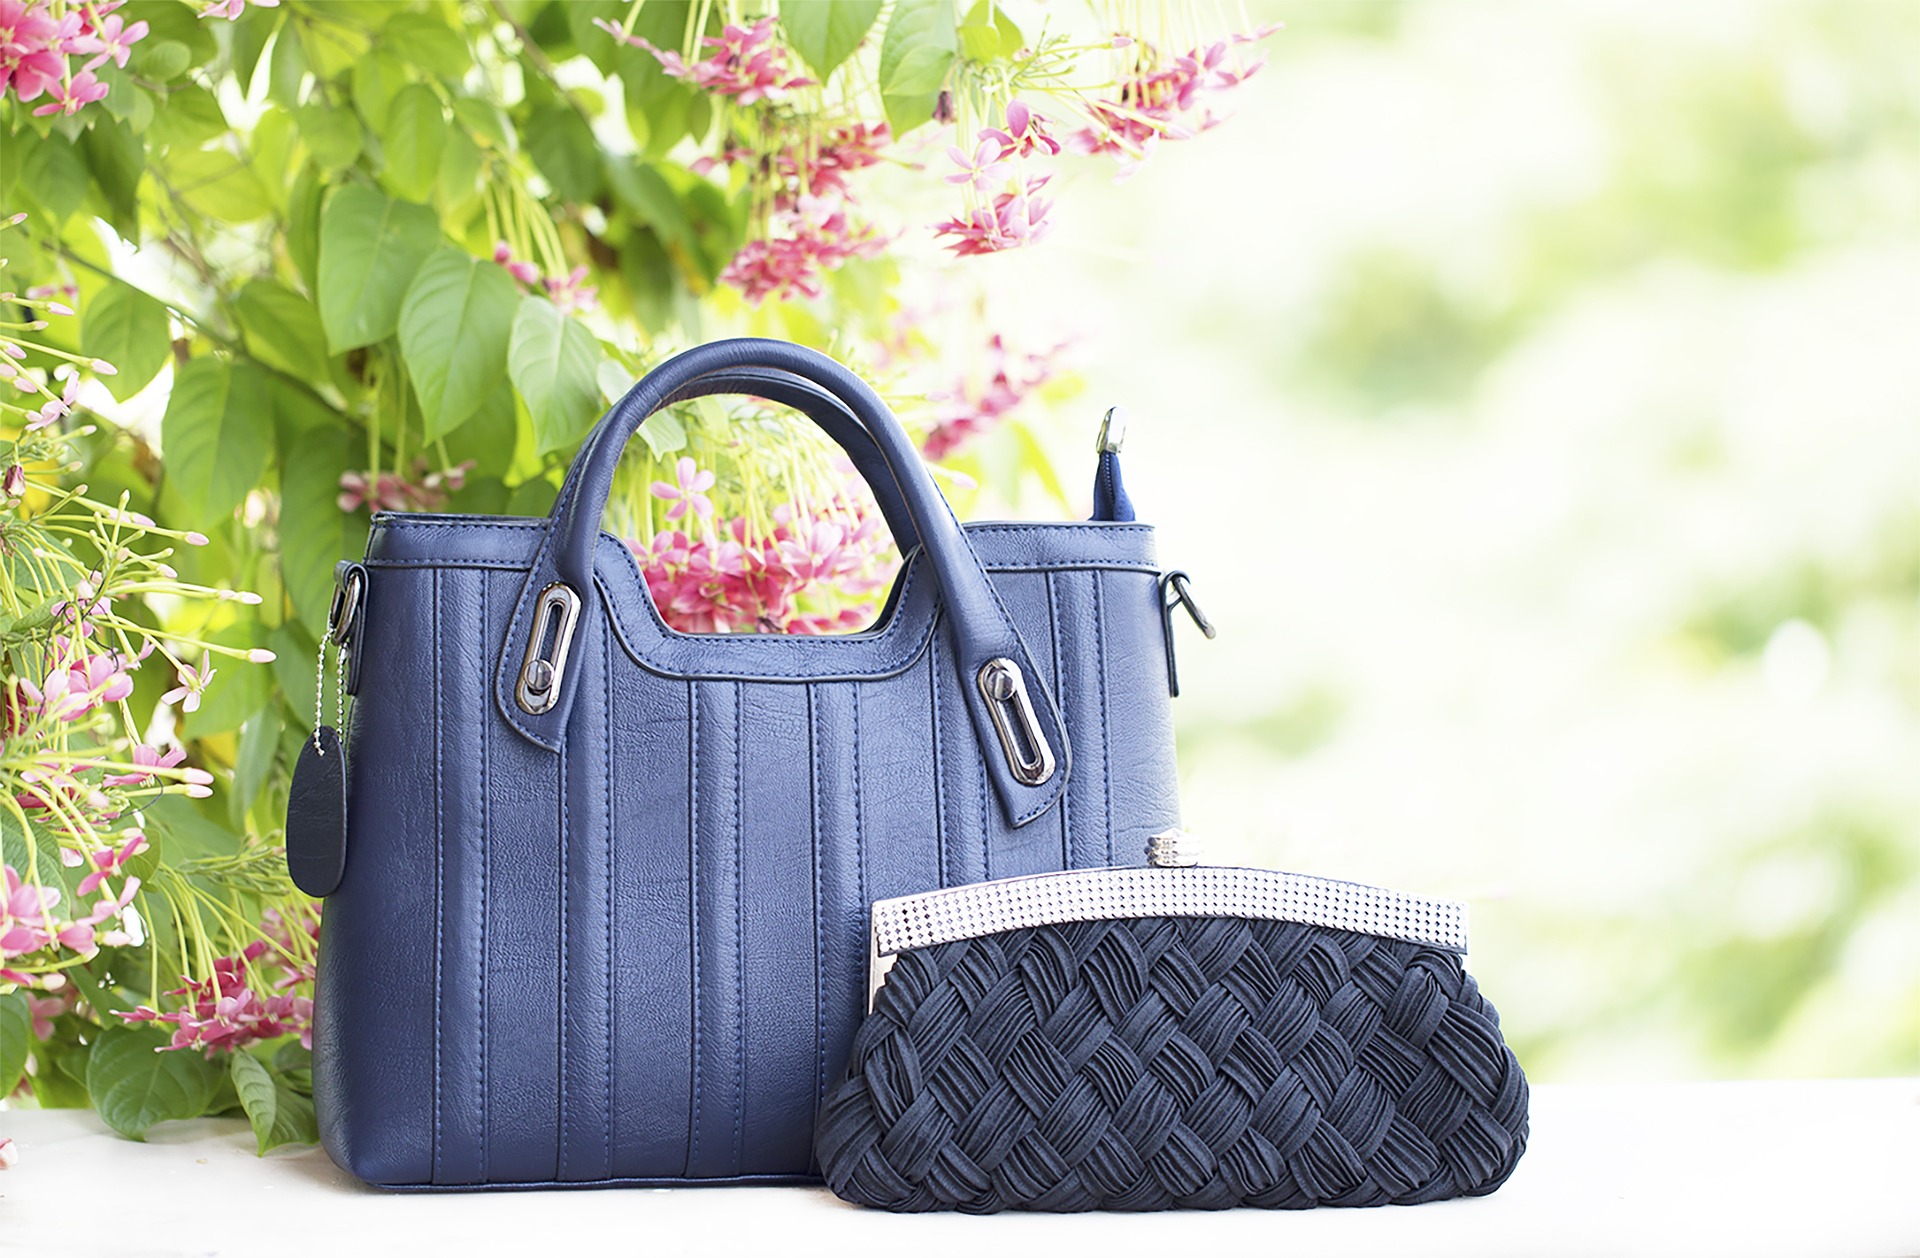 How To Choose The Perfect Designer Handbag For Your Style Requirements